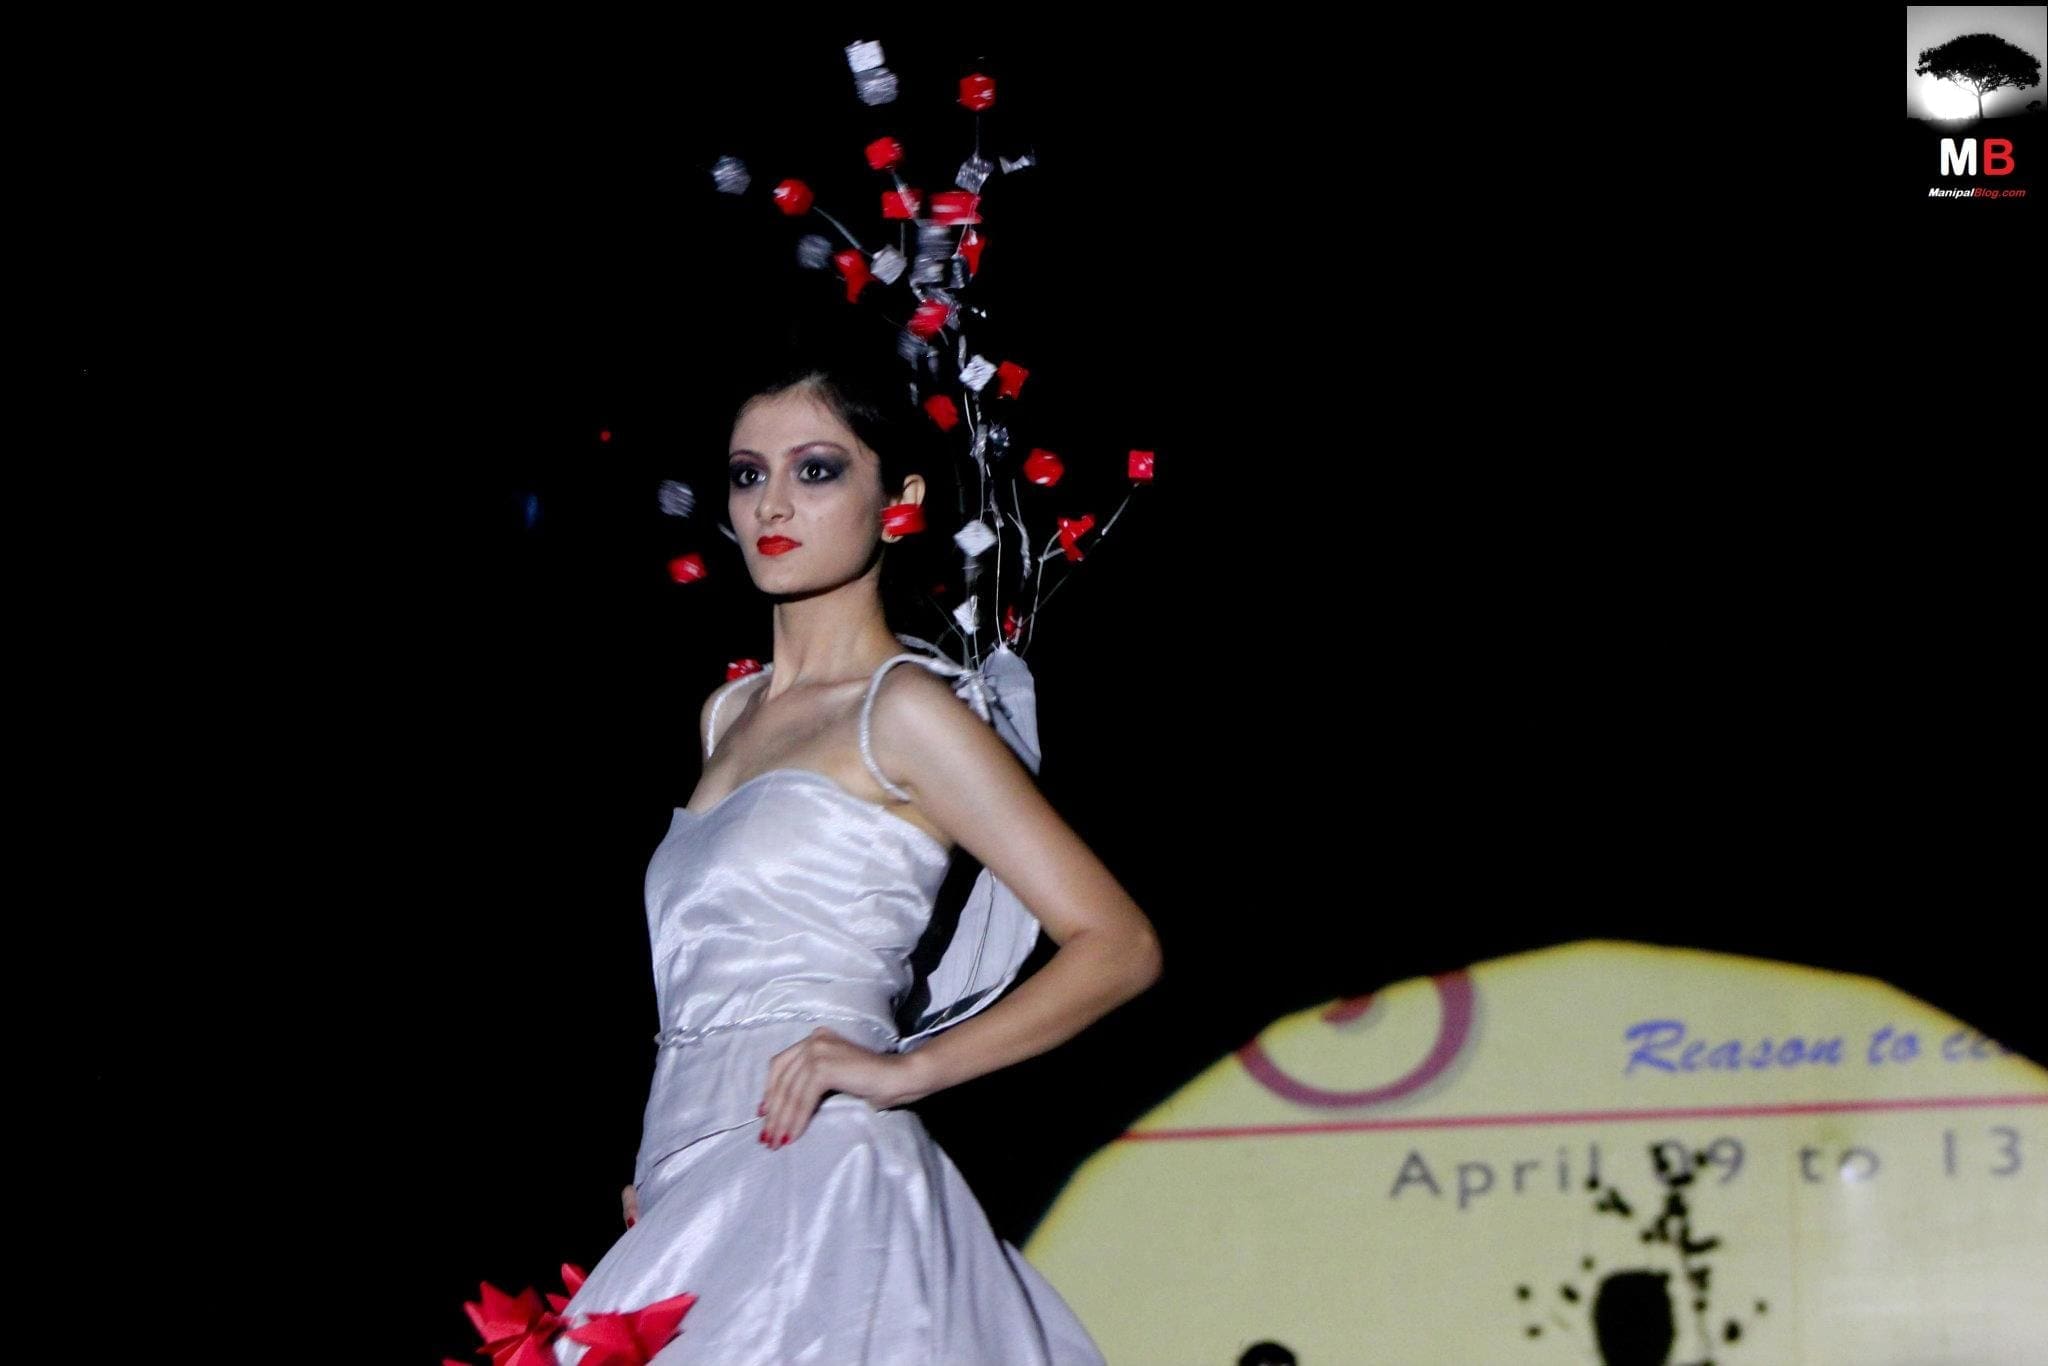 What do you call this? A Manipal Girl Student shows off a White dress with an Environmental theme at the Manipal University Fashion Show UTSAV 2012 | Photo by Mahesh Mayuur